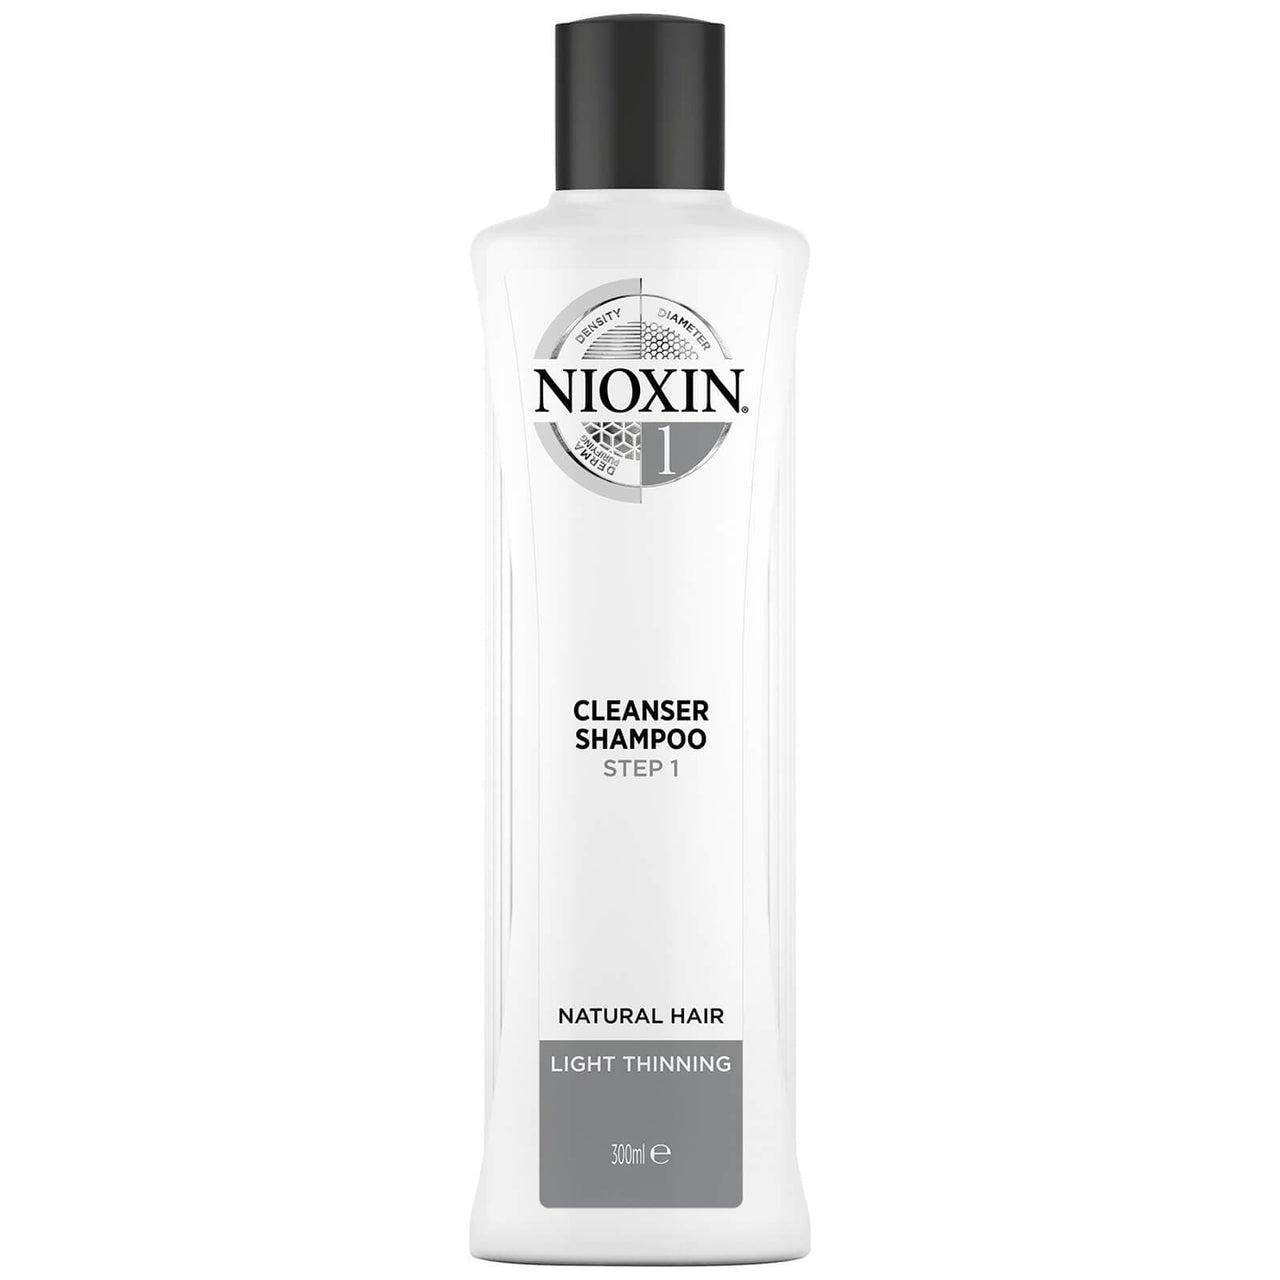 NIOXIN 3-Part System 1 Cleanser Shampoo for Natural Hair with Light Thinning